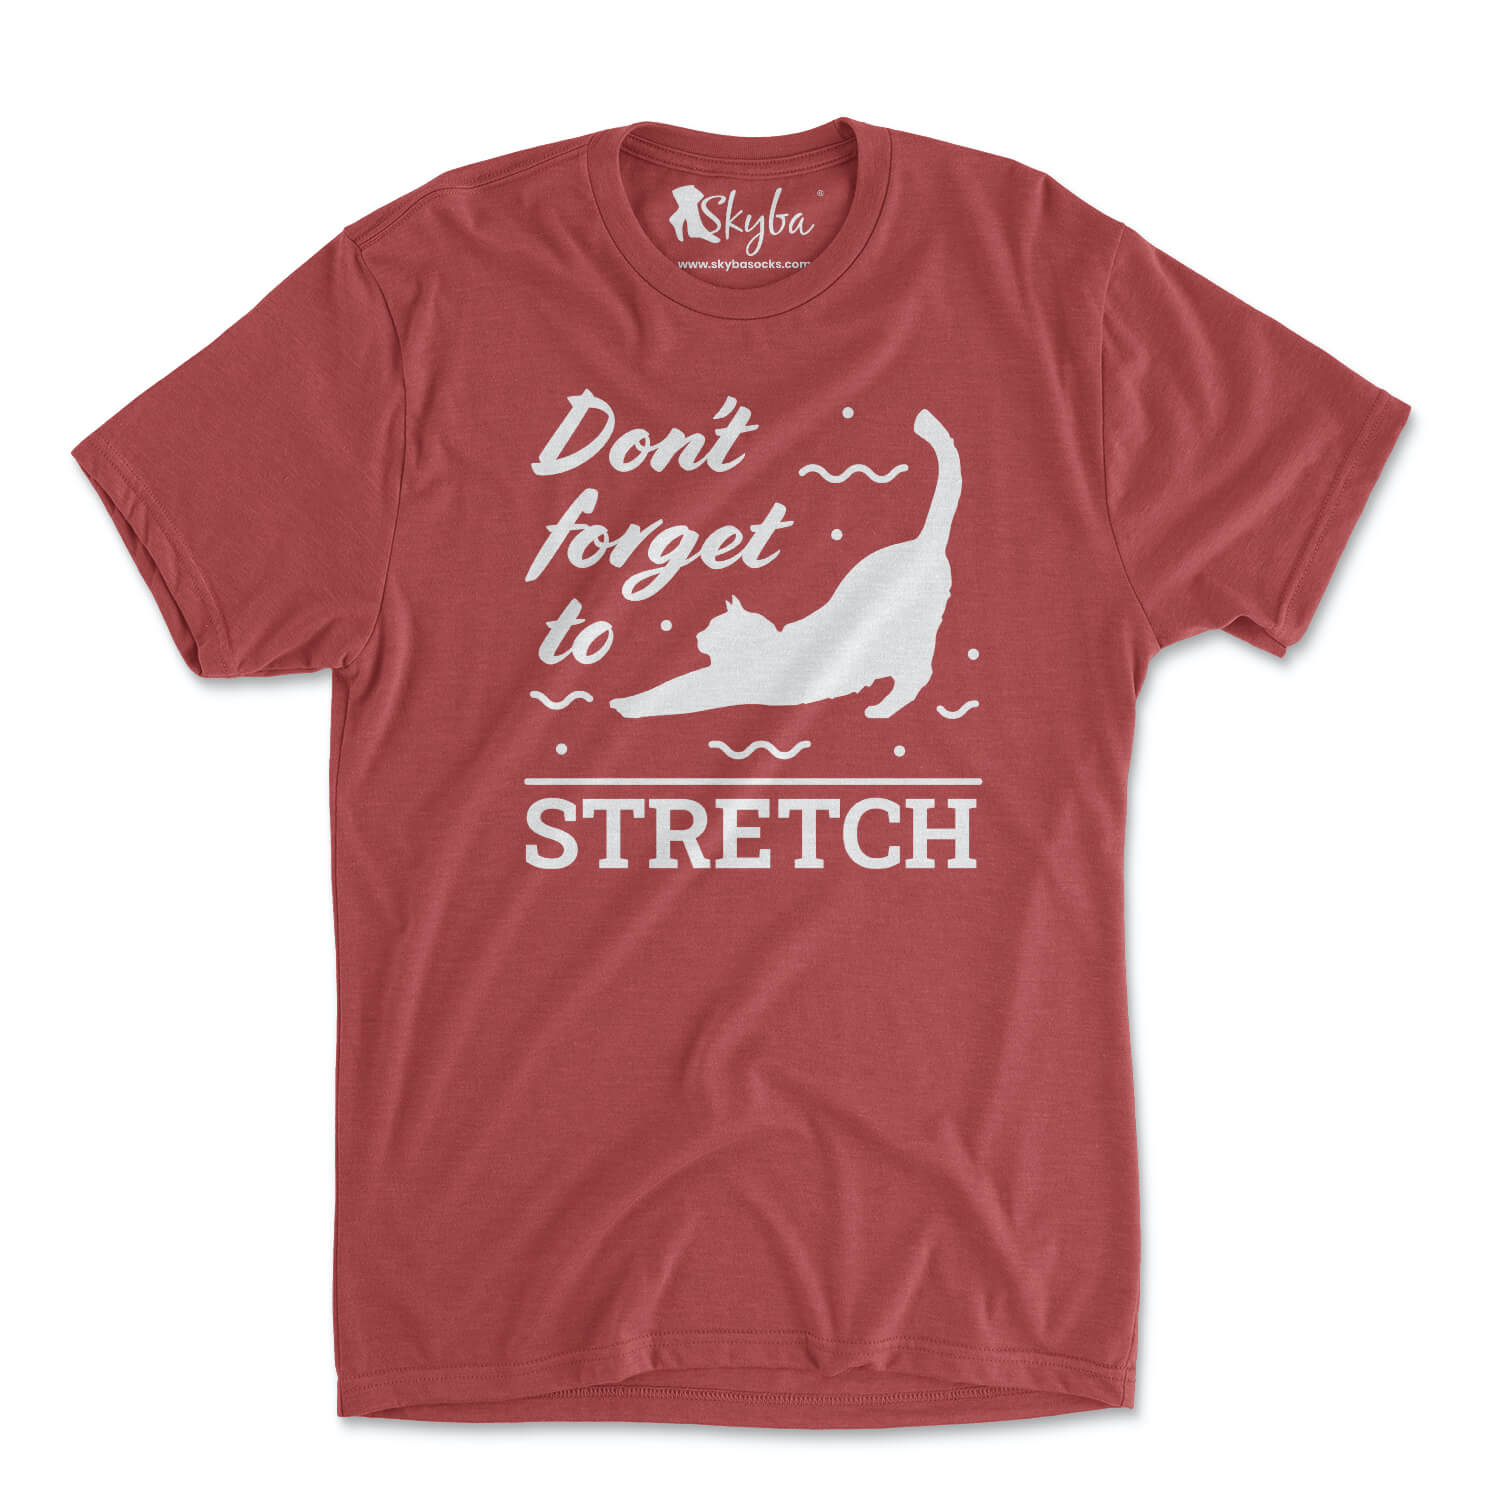 Don't Forget to Stretch - Tri Blend Tee Skyba Tri-Blend Tee